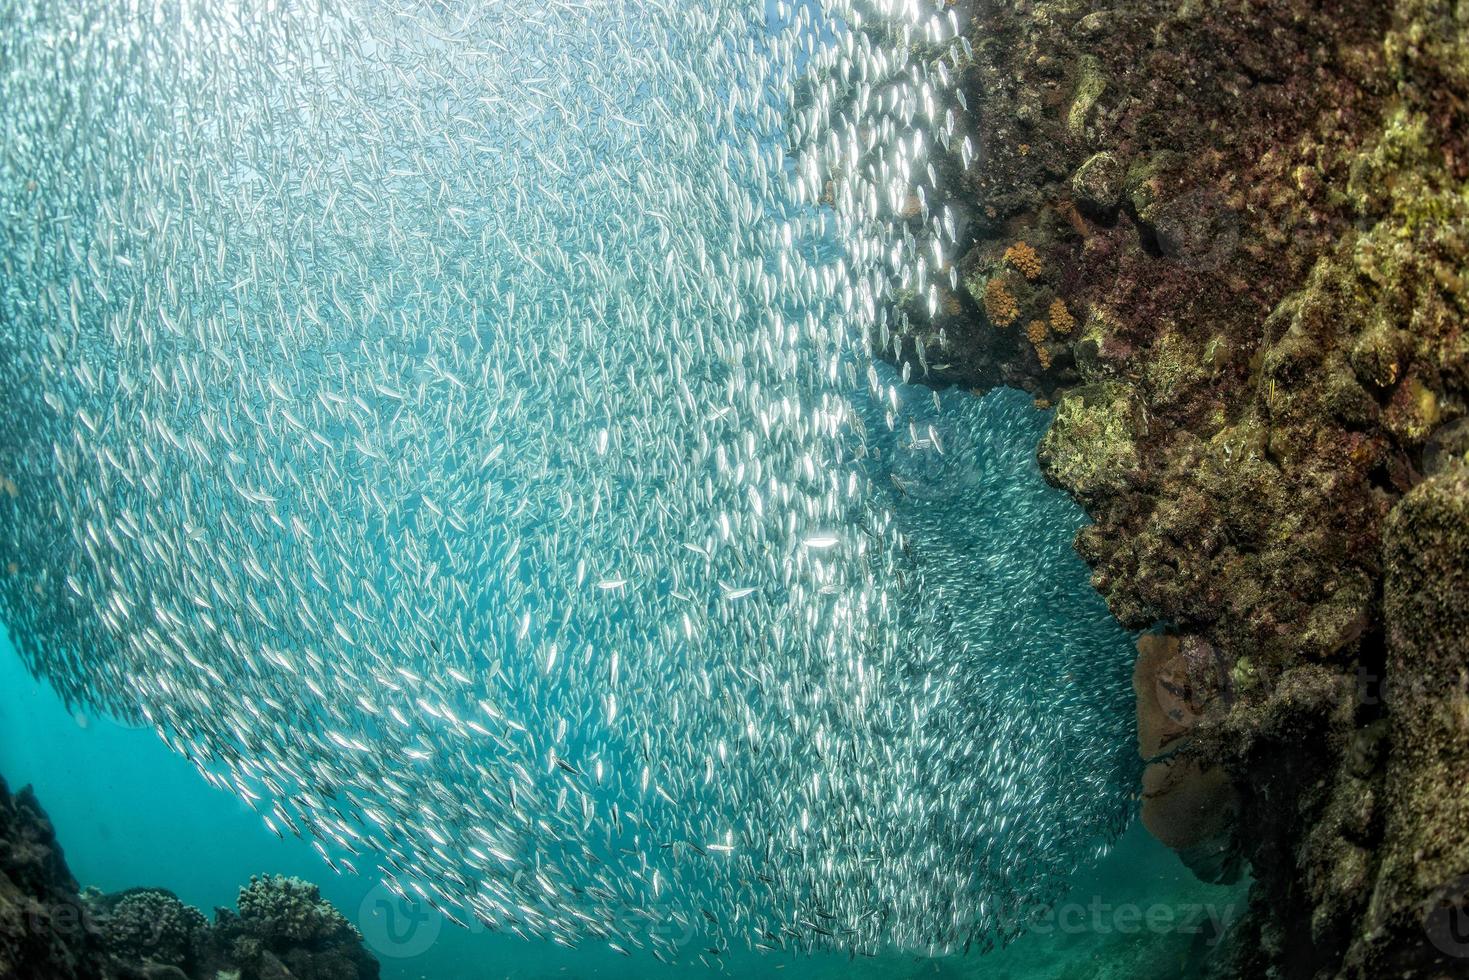 going Inside a giant sardines school of fish photo